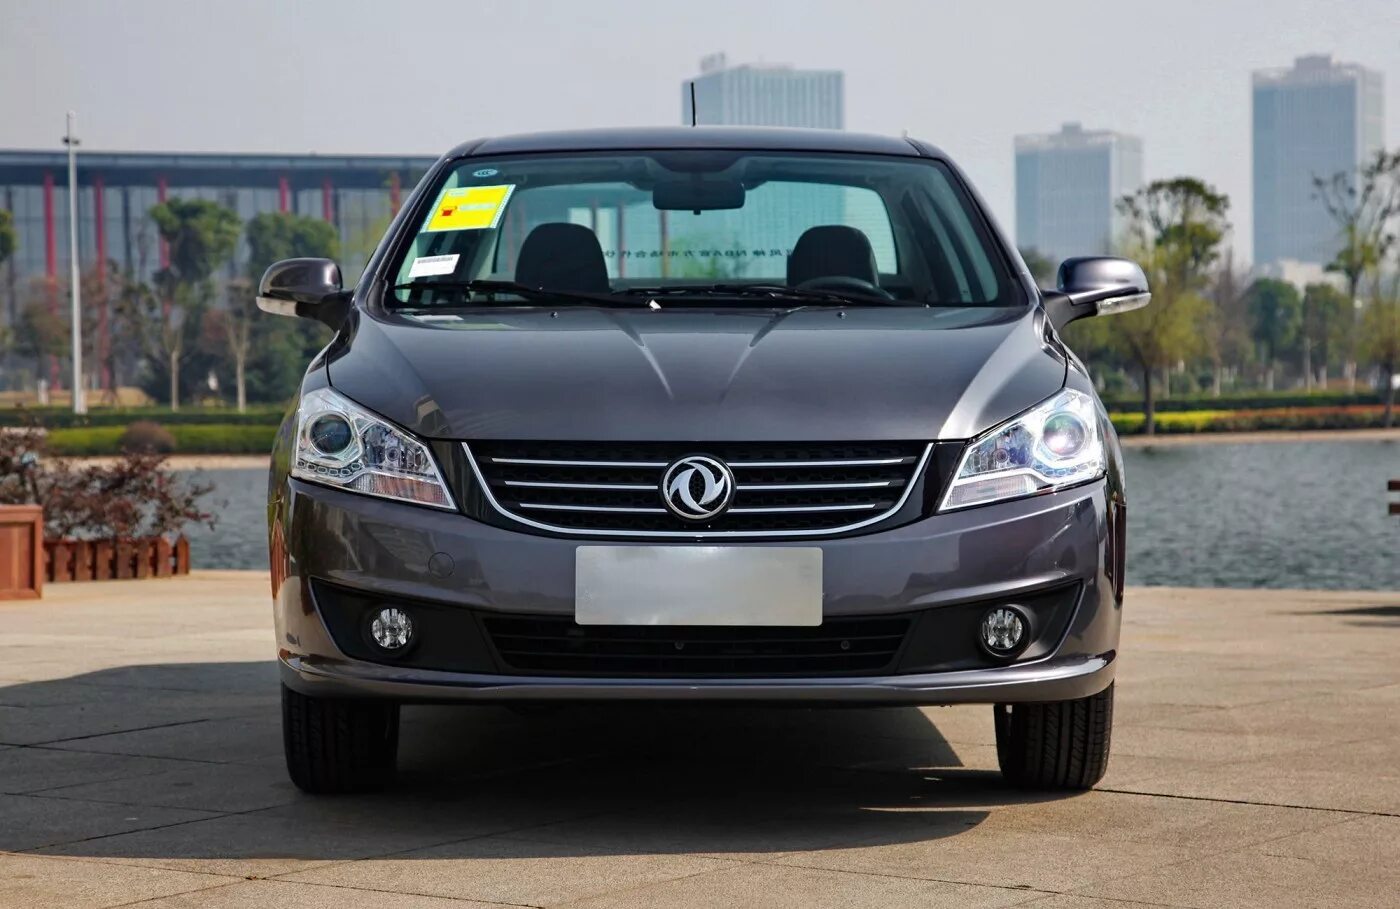 Dongfeng. Донг Фенг s30. Dongfeng DFM s30. Dongfeng s30 2014. DFM s30 машина.